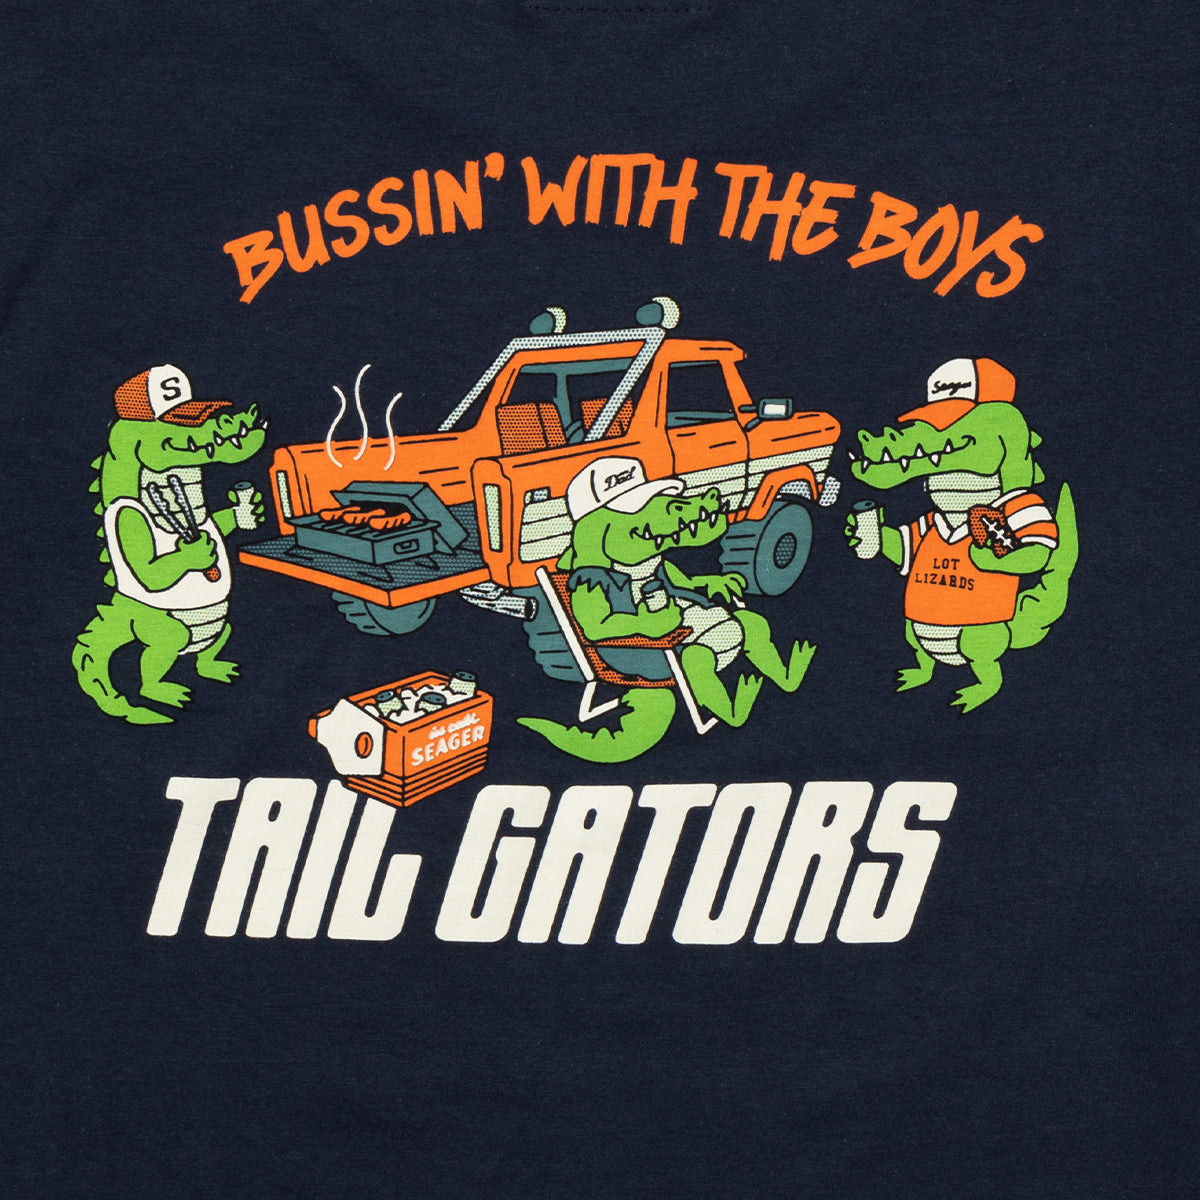 Seager x Bussin With The Boys Tailgators Tee-T-Shirts-Bussin With The Boys-Barstool Sports